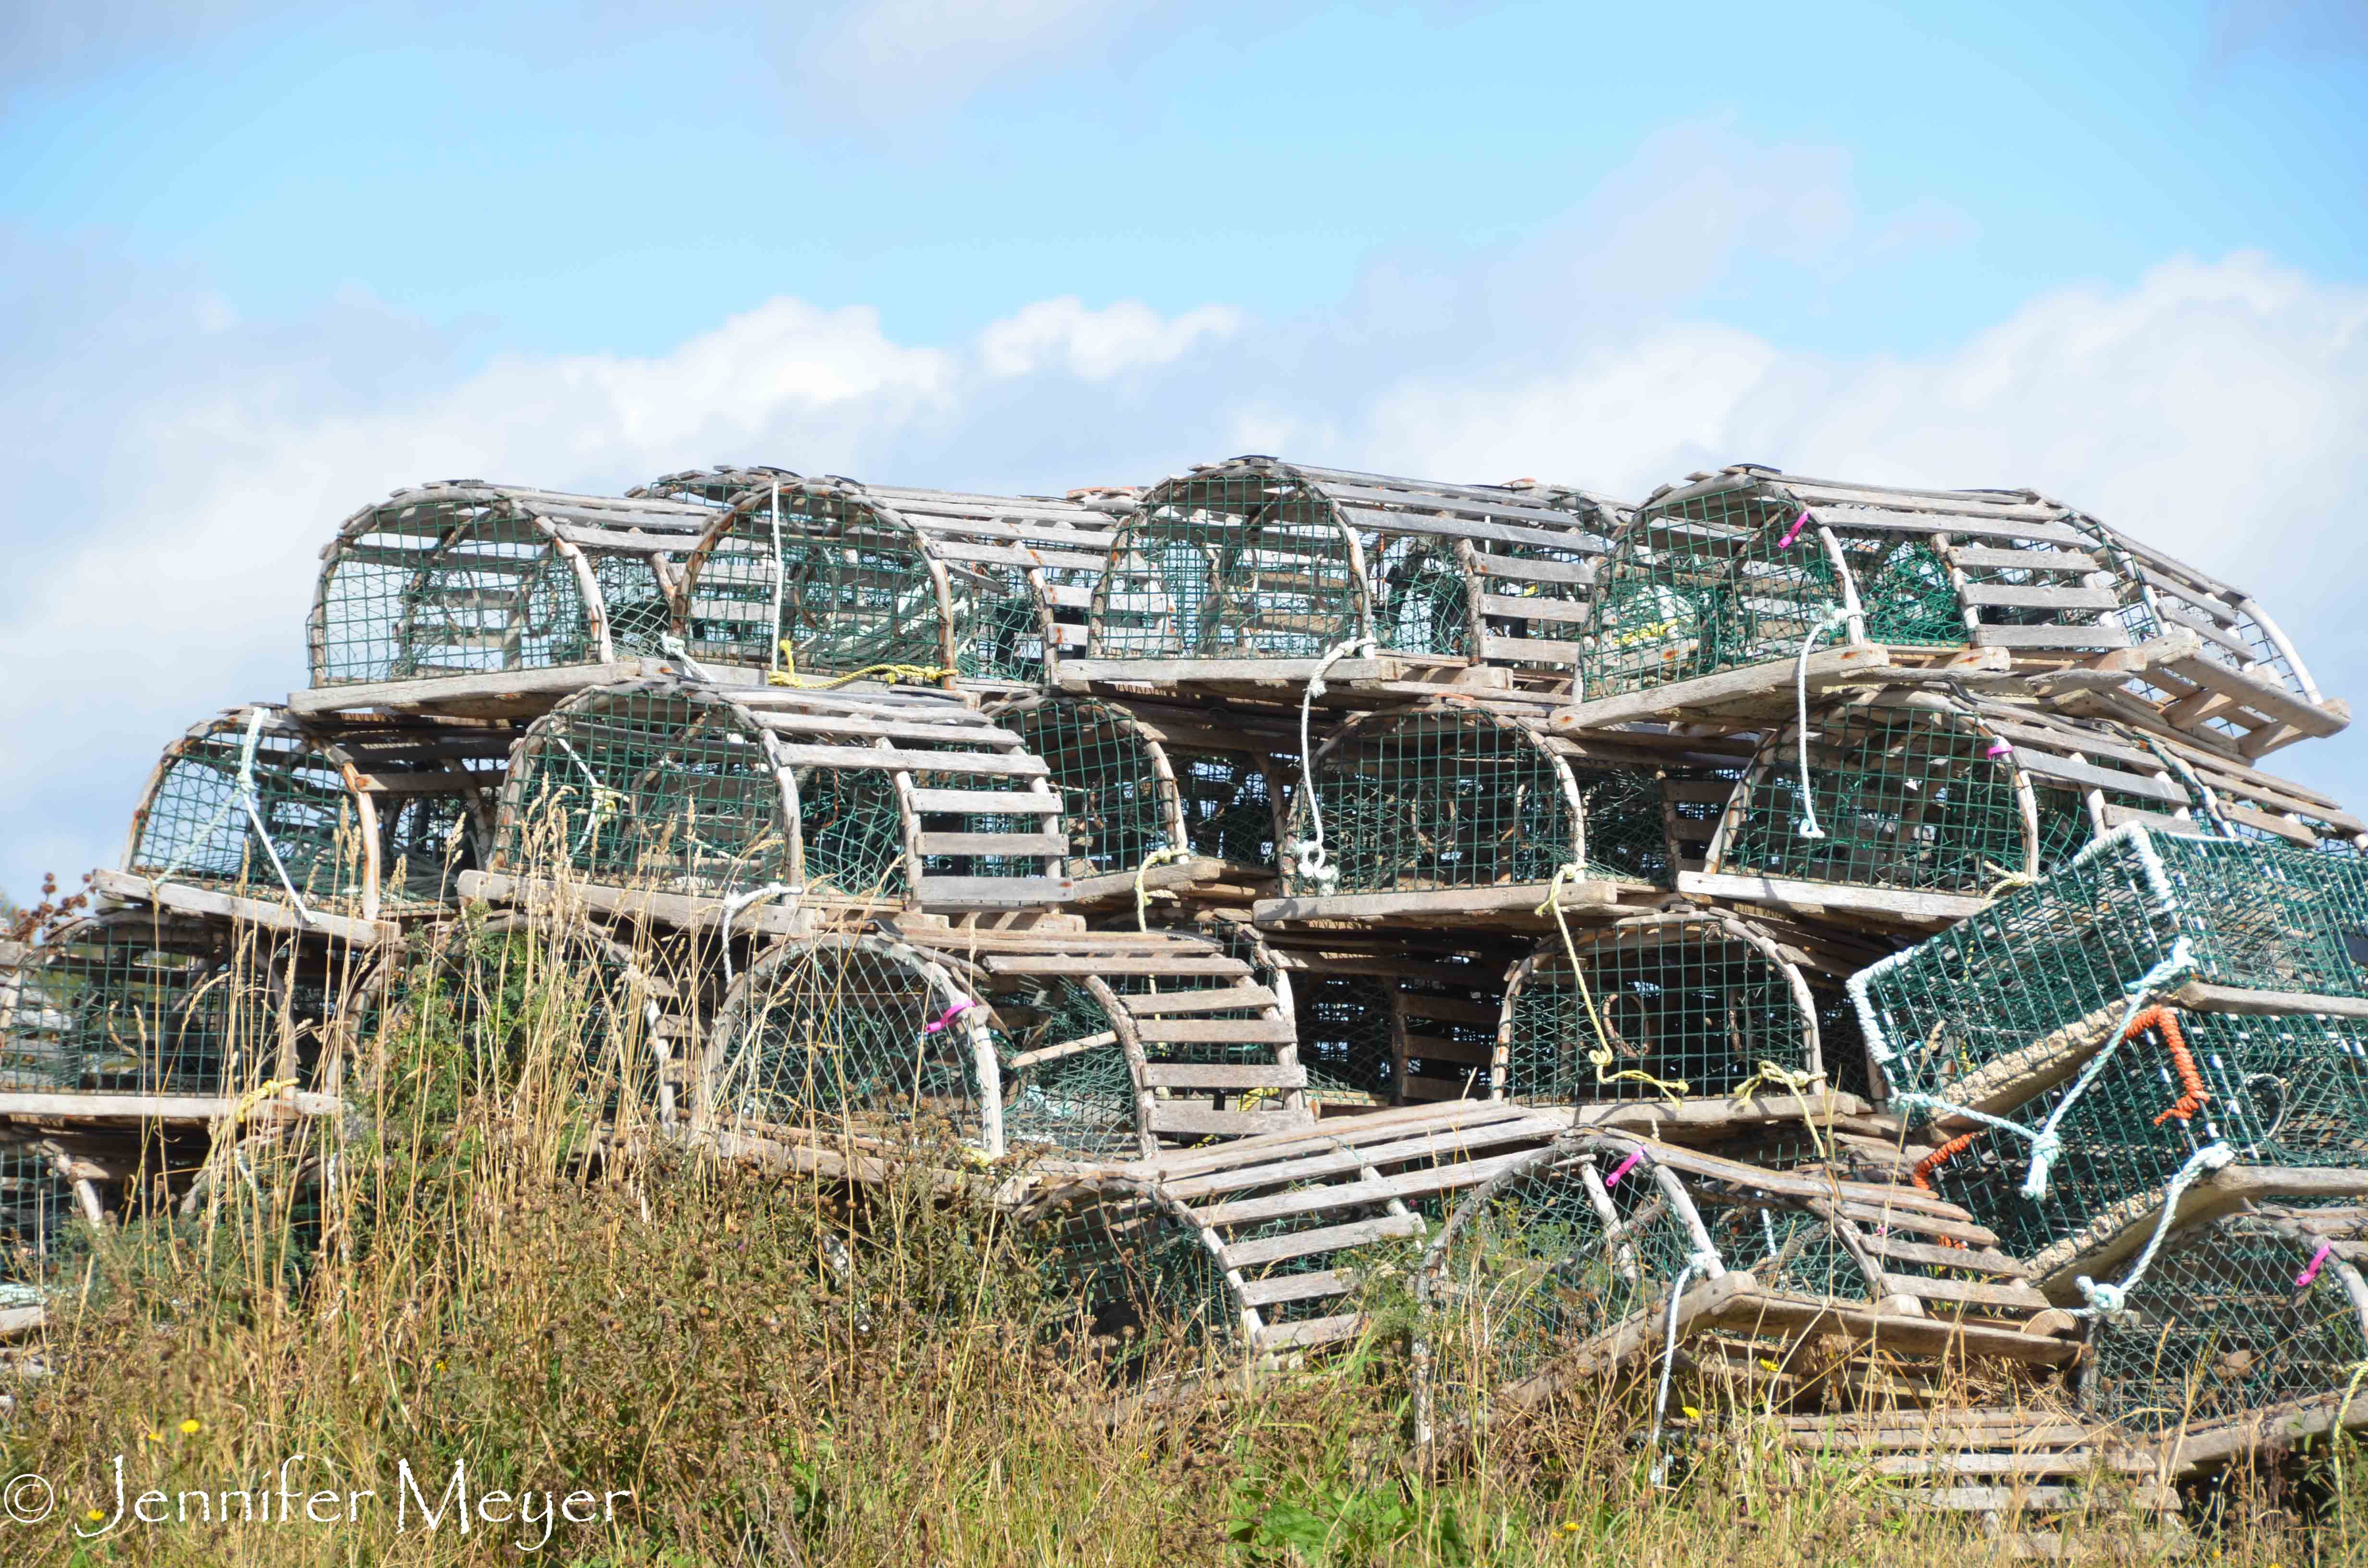 More lobster traps.